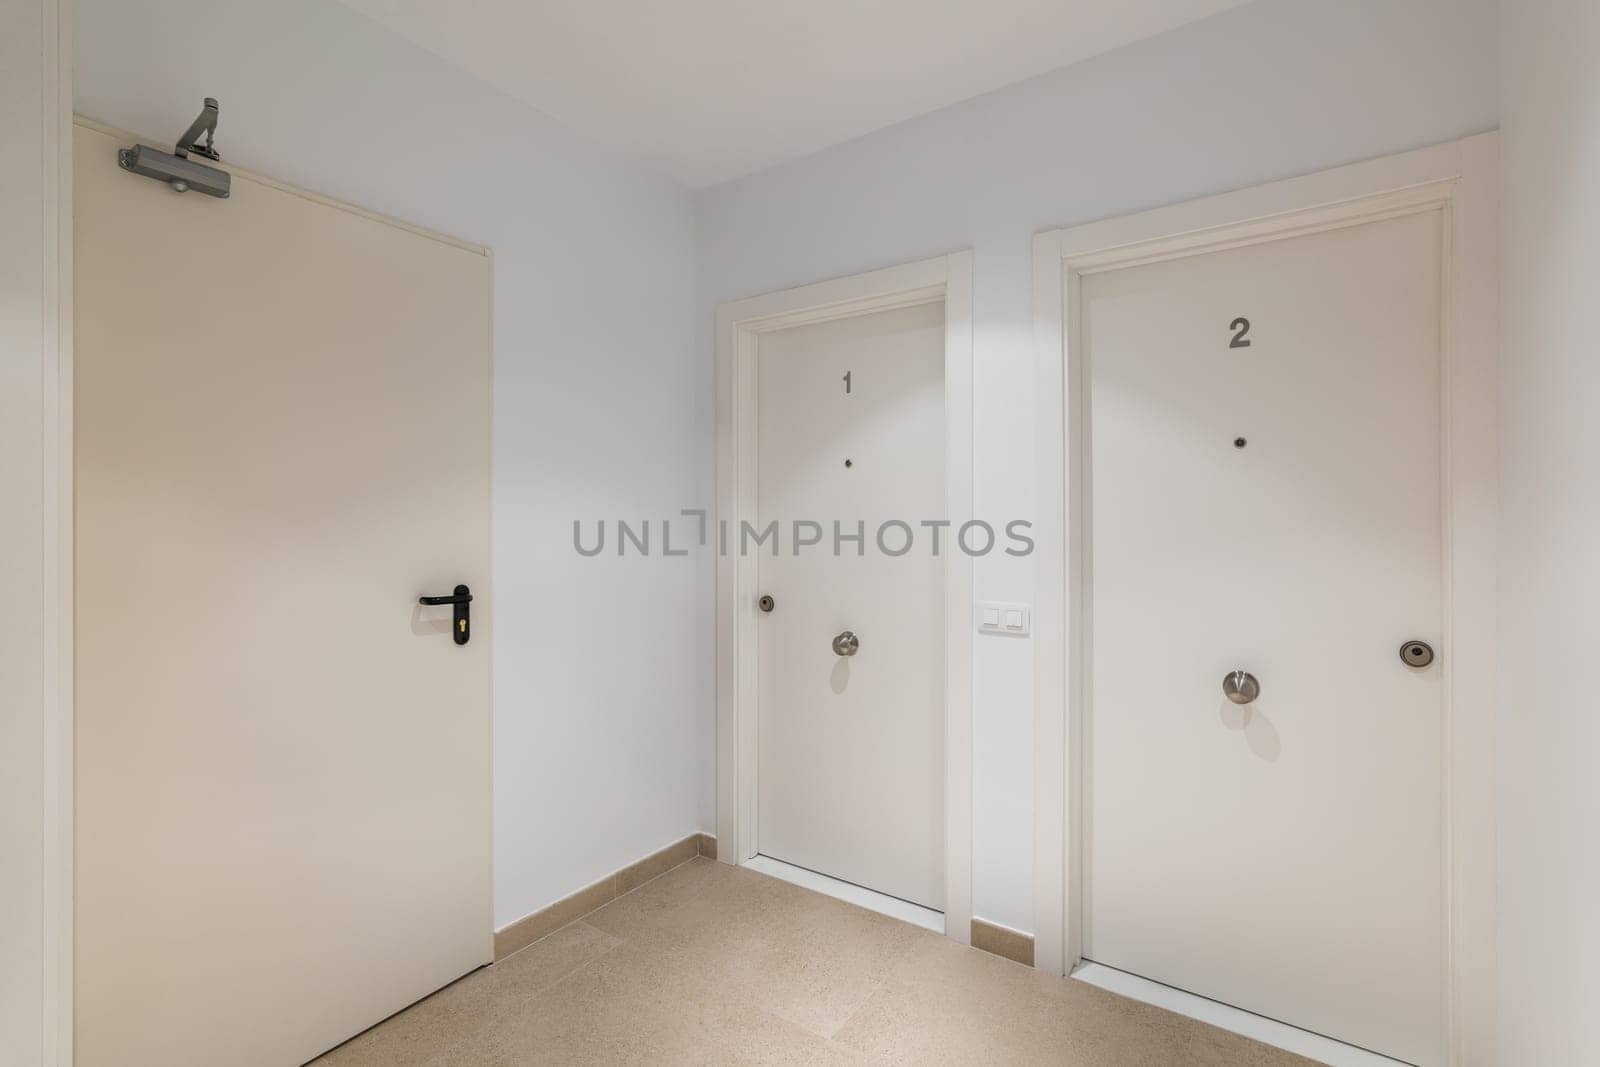 Hall space with two entrance doors to apartments or hotel rooms with the numbers one and two in white. The concept of a cozy compact five-star hotel by apavlin